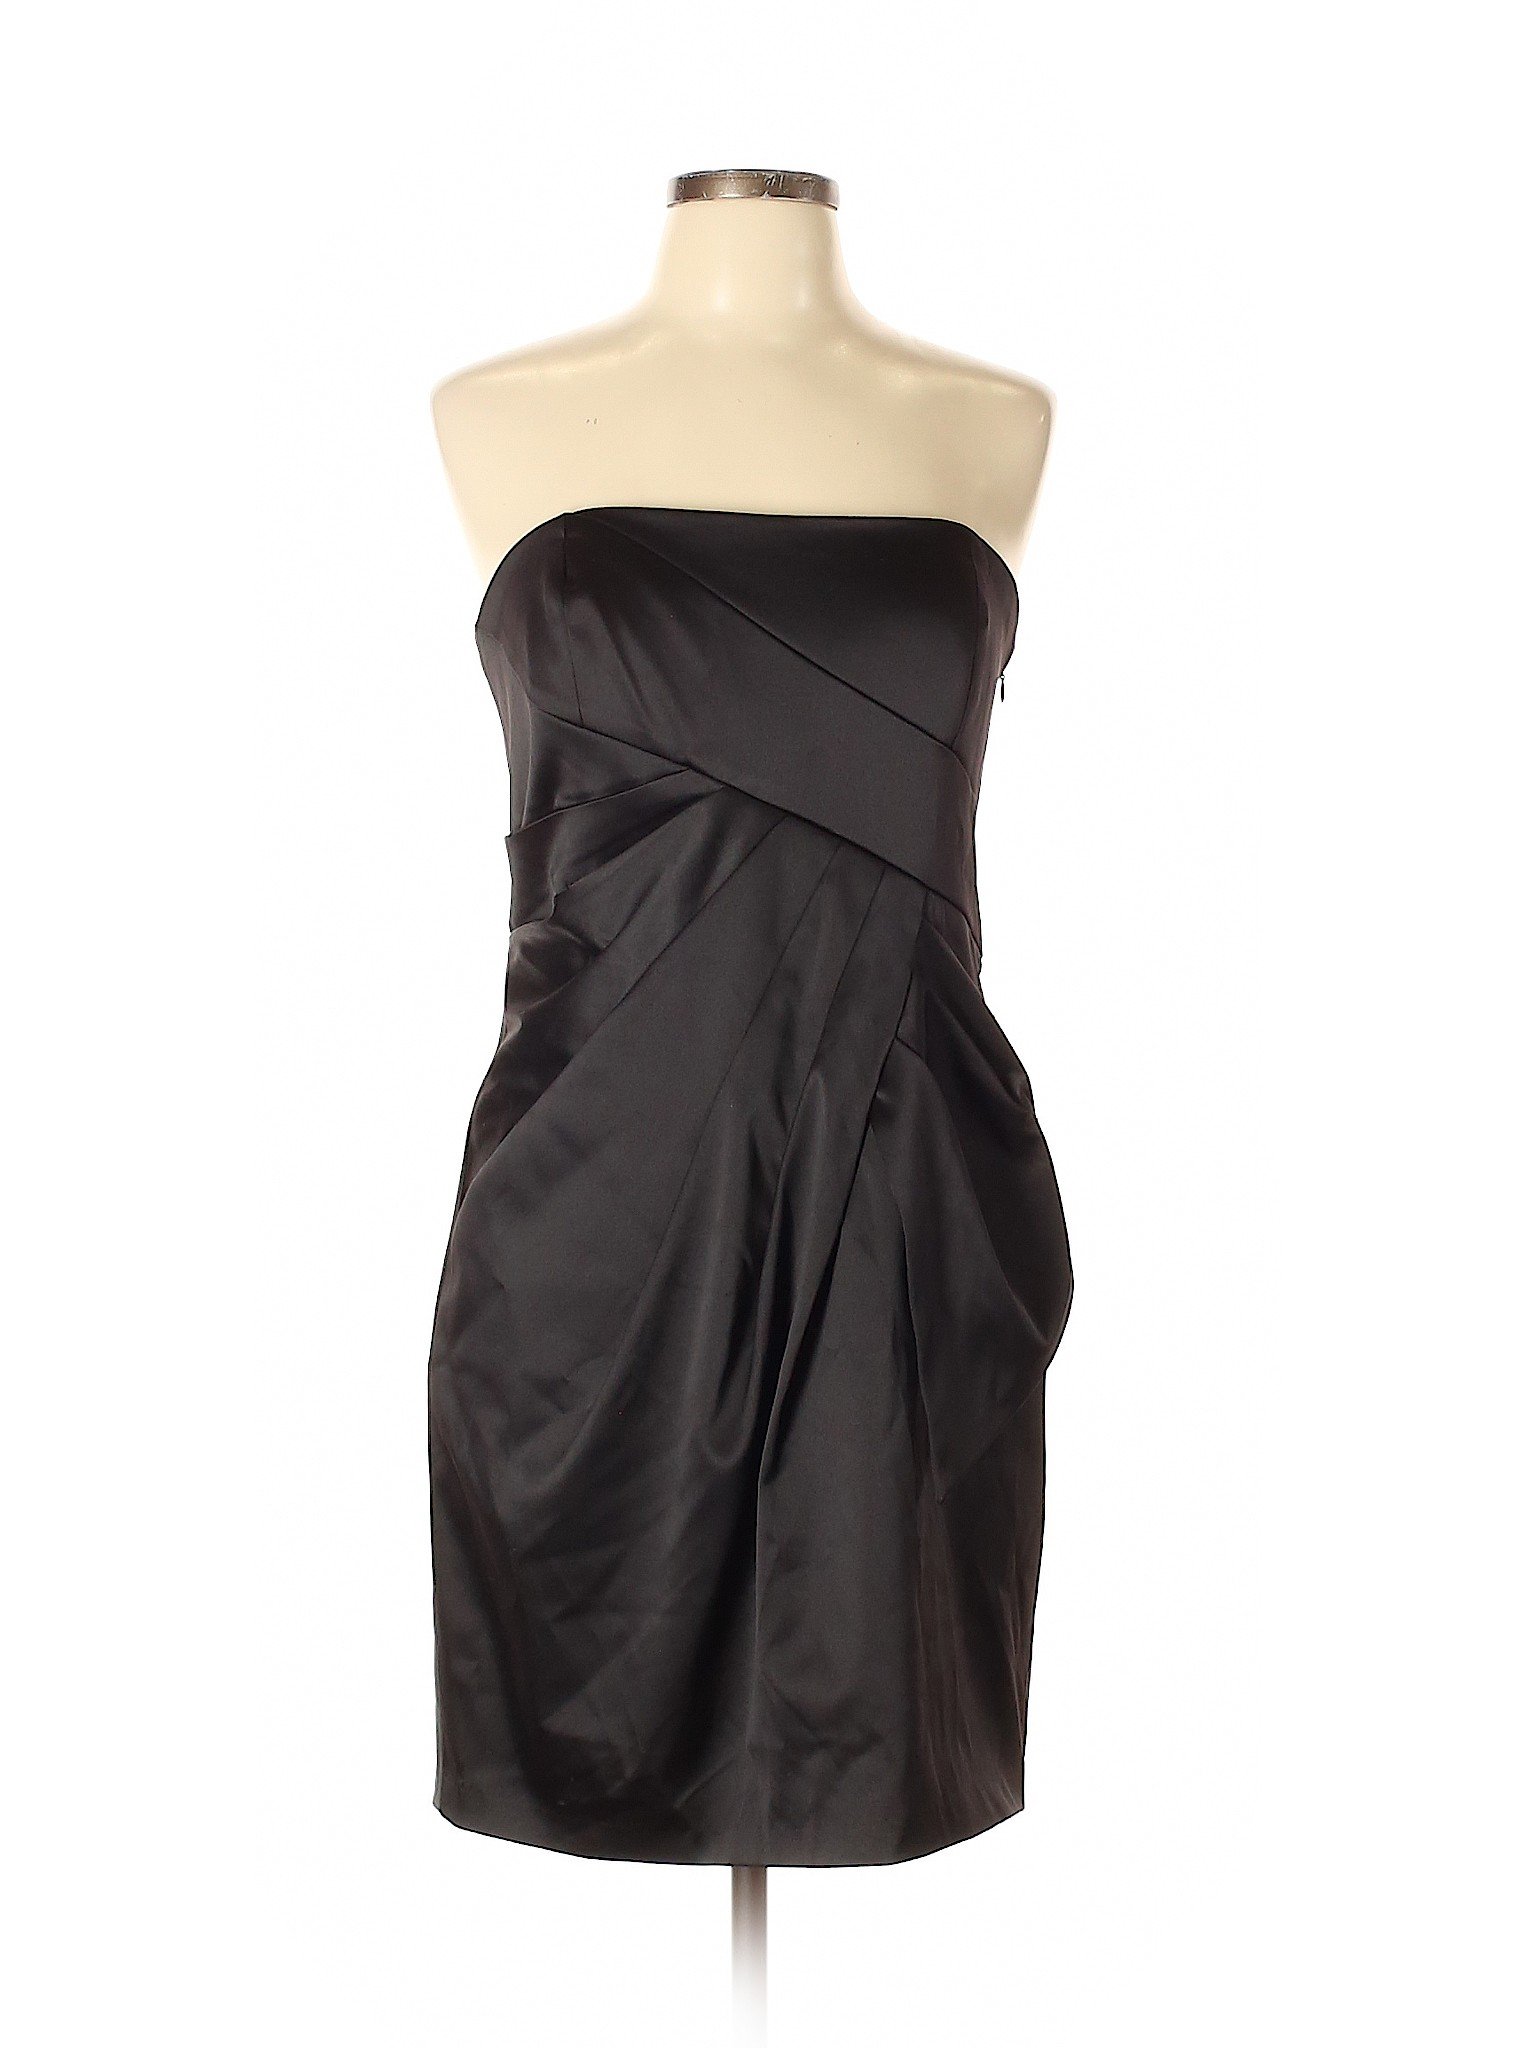 Max and Cleo Solid Black Cocktail Dress Size 12 - 91% off | thredUP